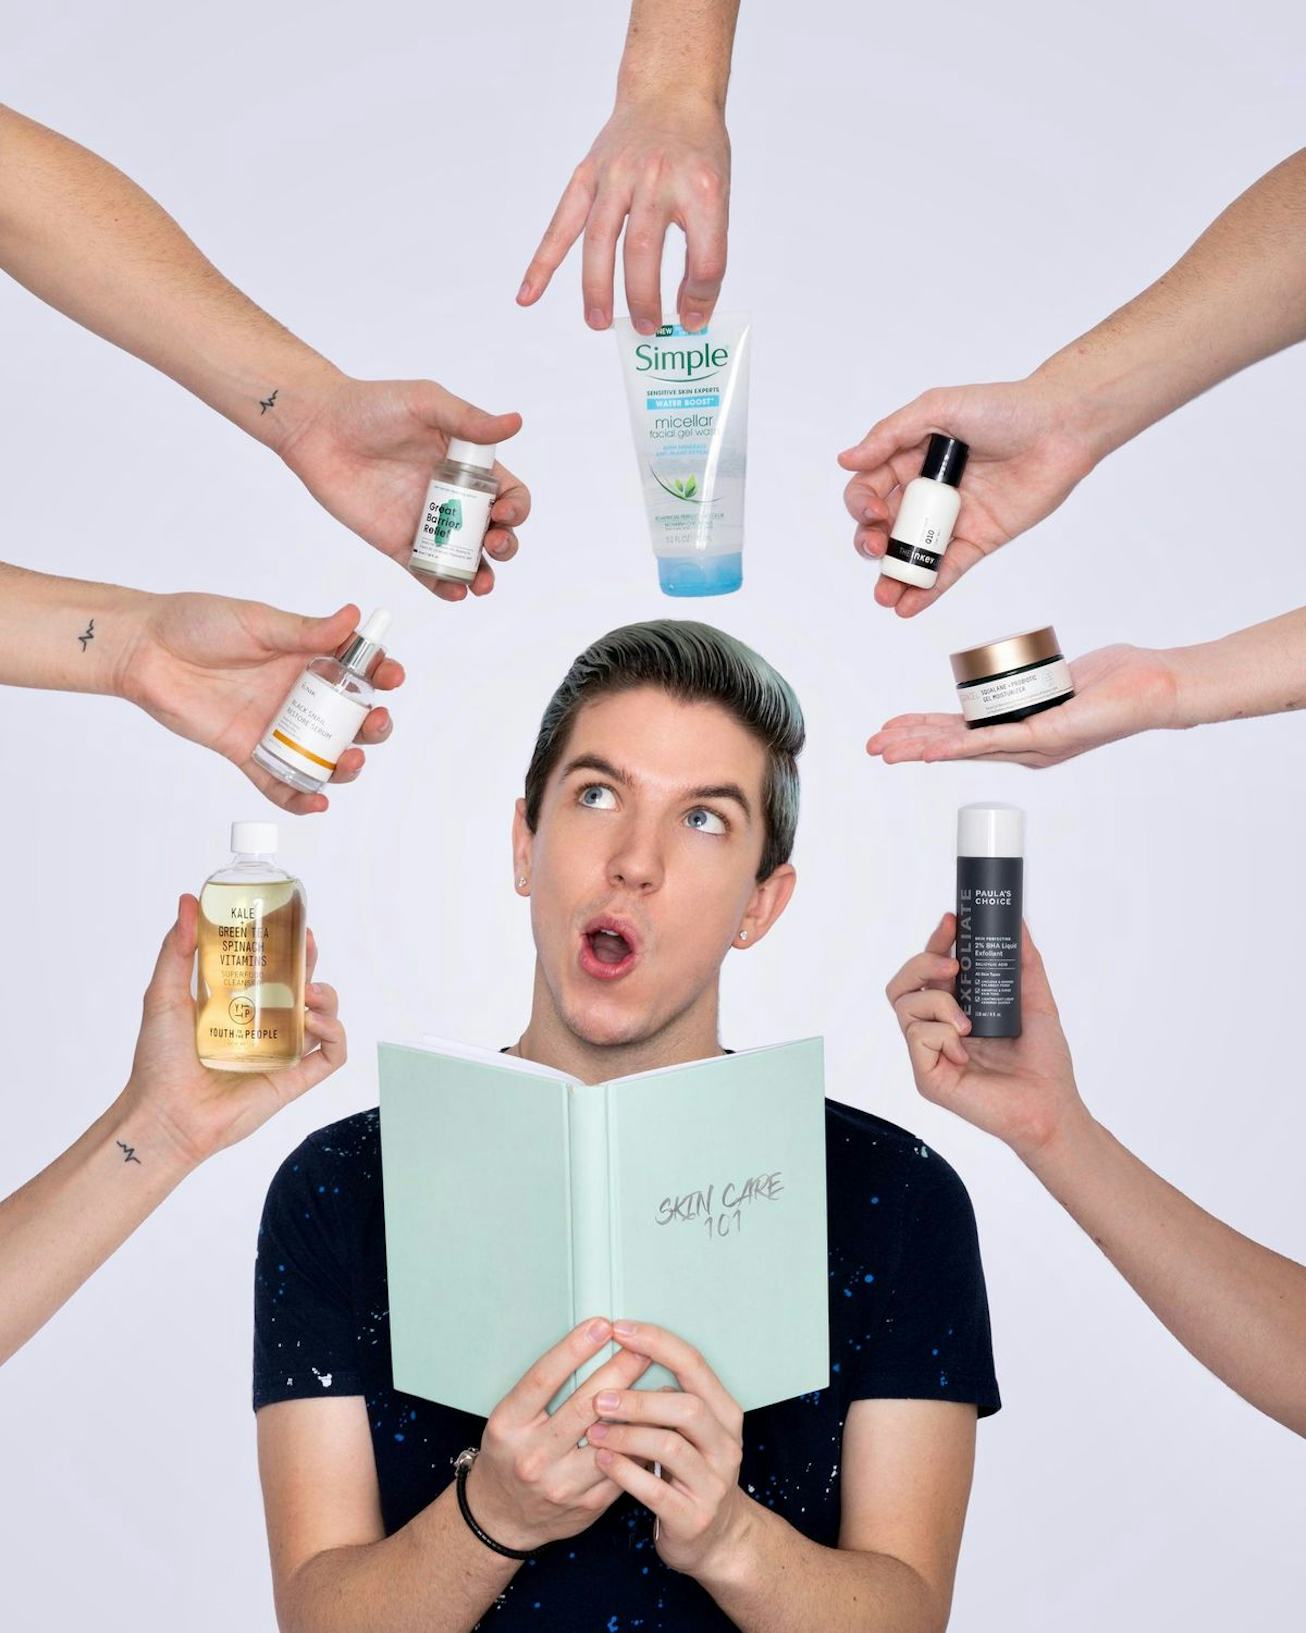 Hyram poses with hands holding skincare products